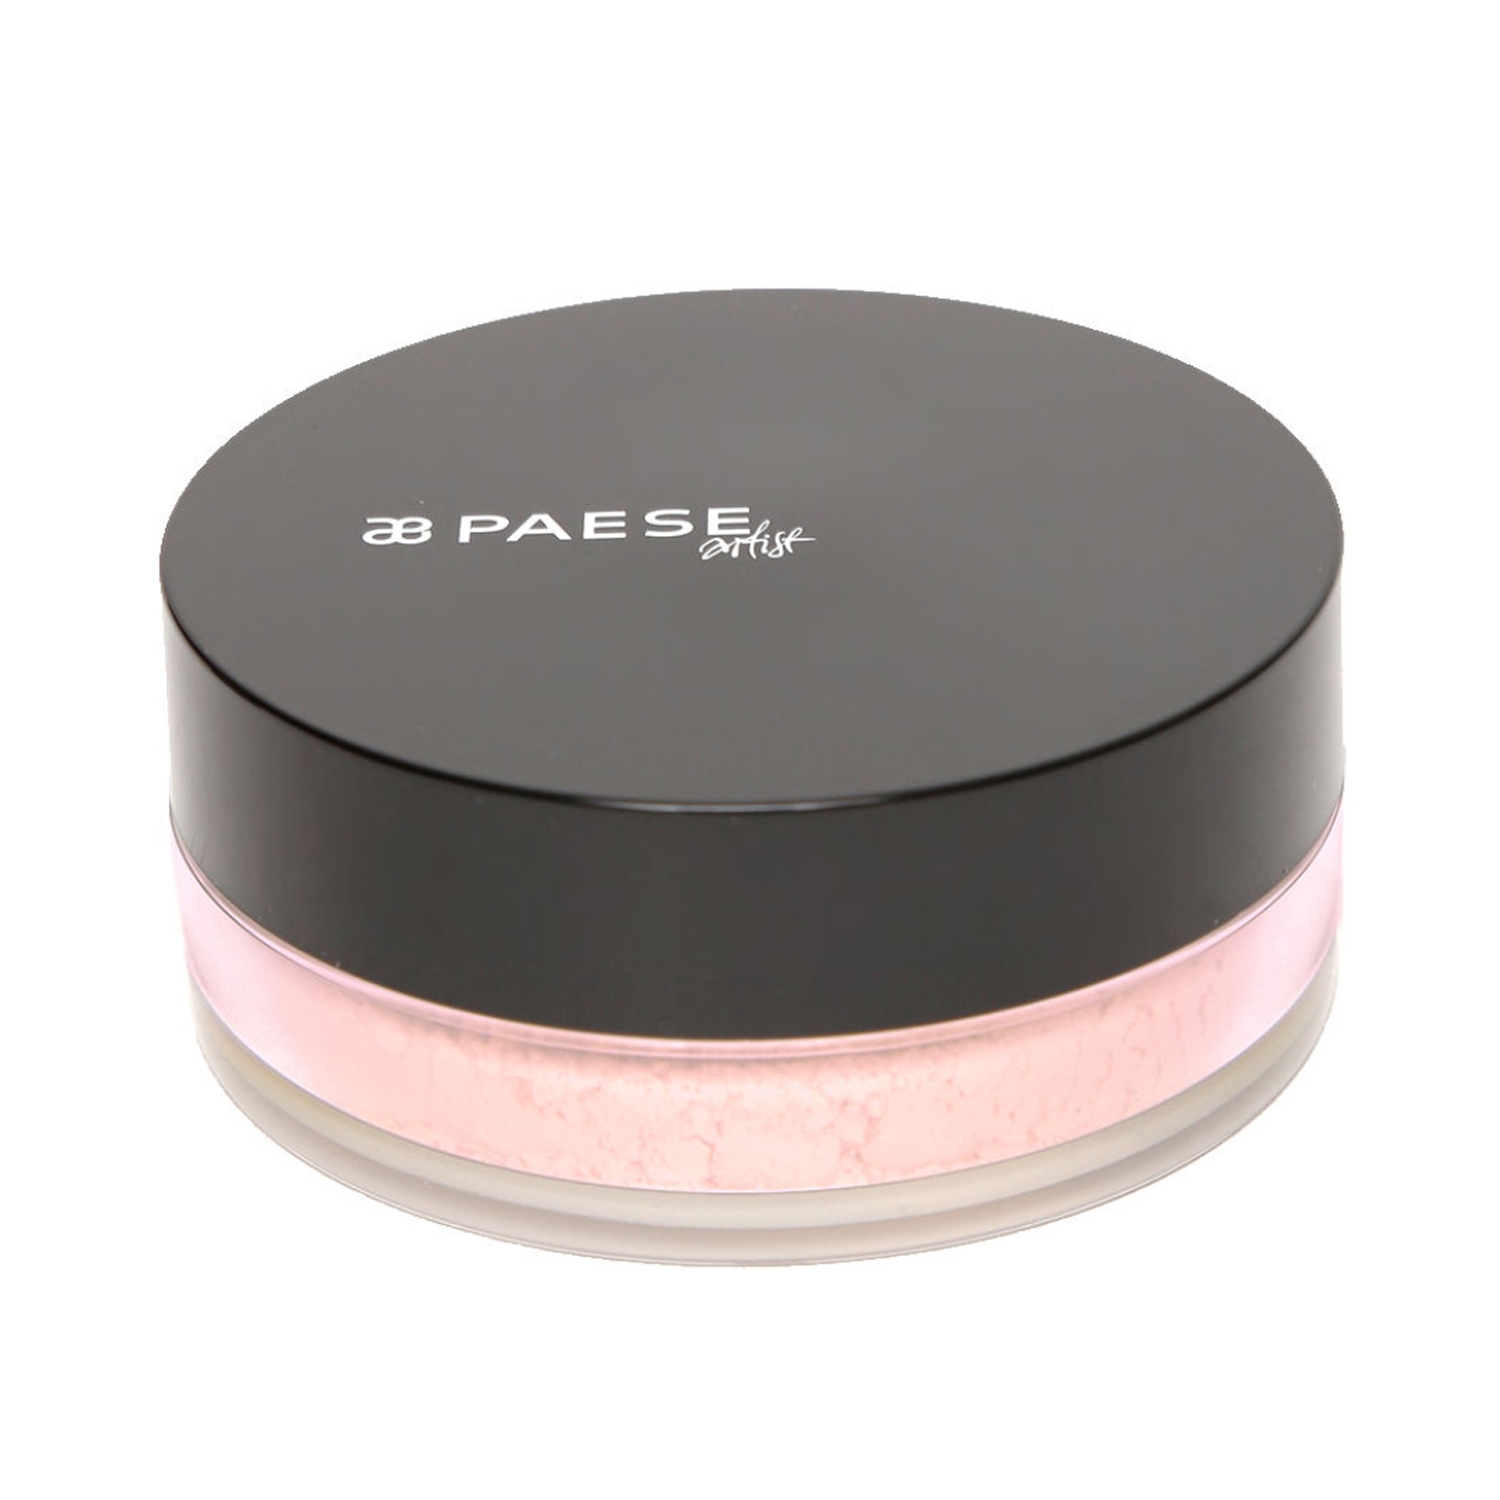 Paese Cosmetics | Paese Cosmetics High Definition Loose Powder - 01 Shade (15g)